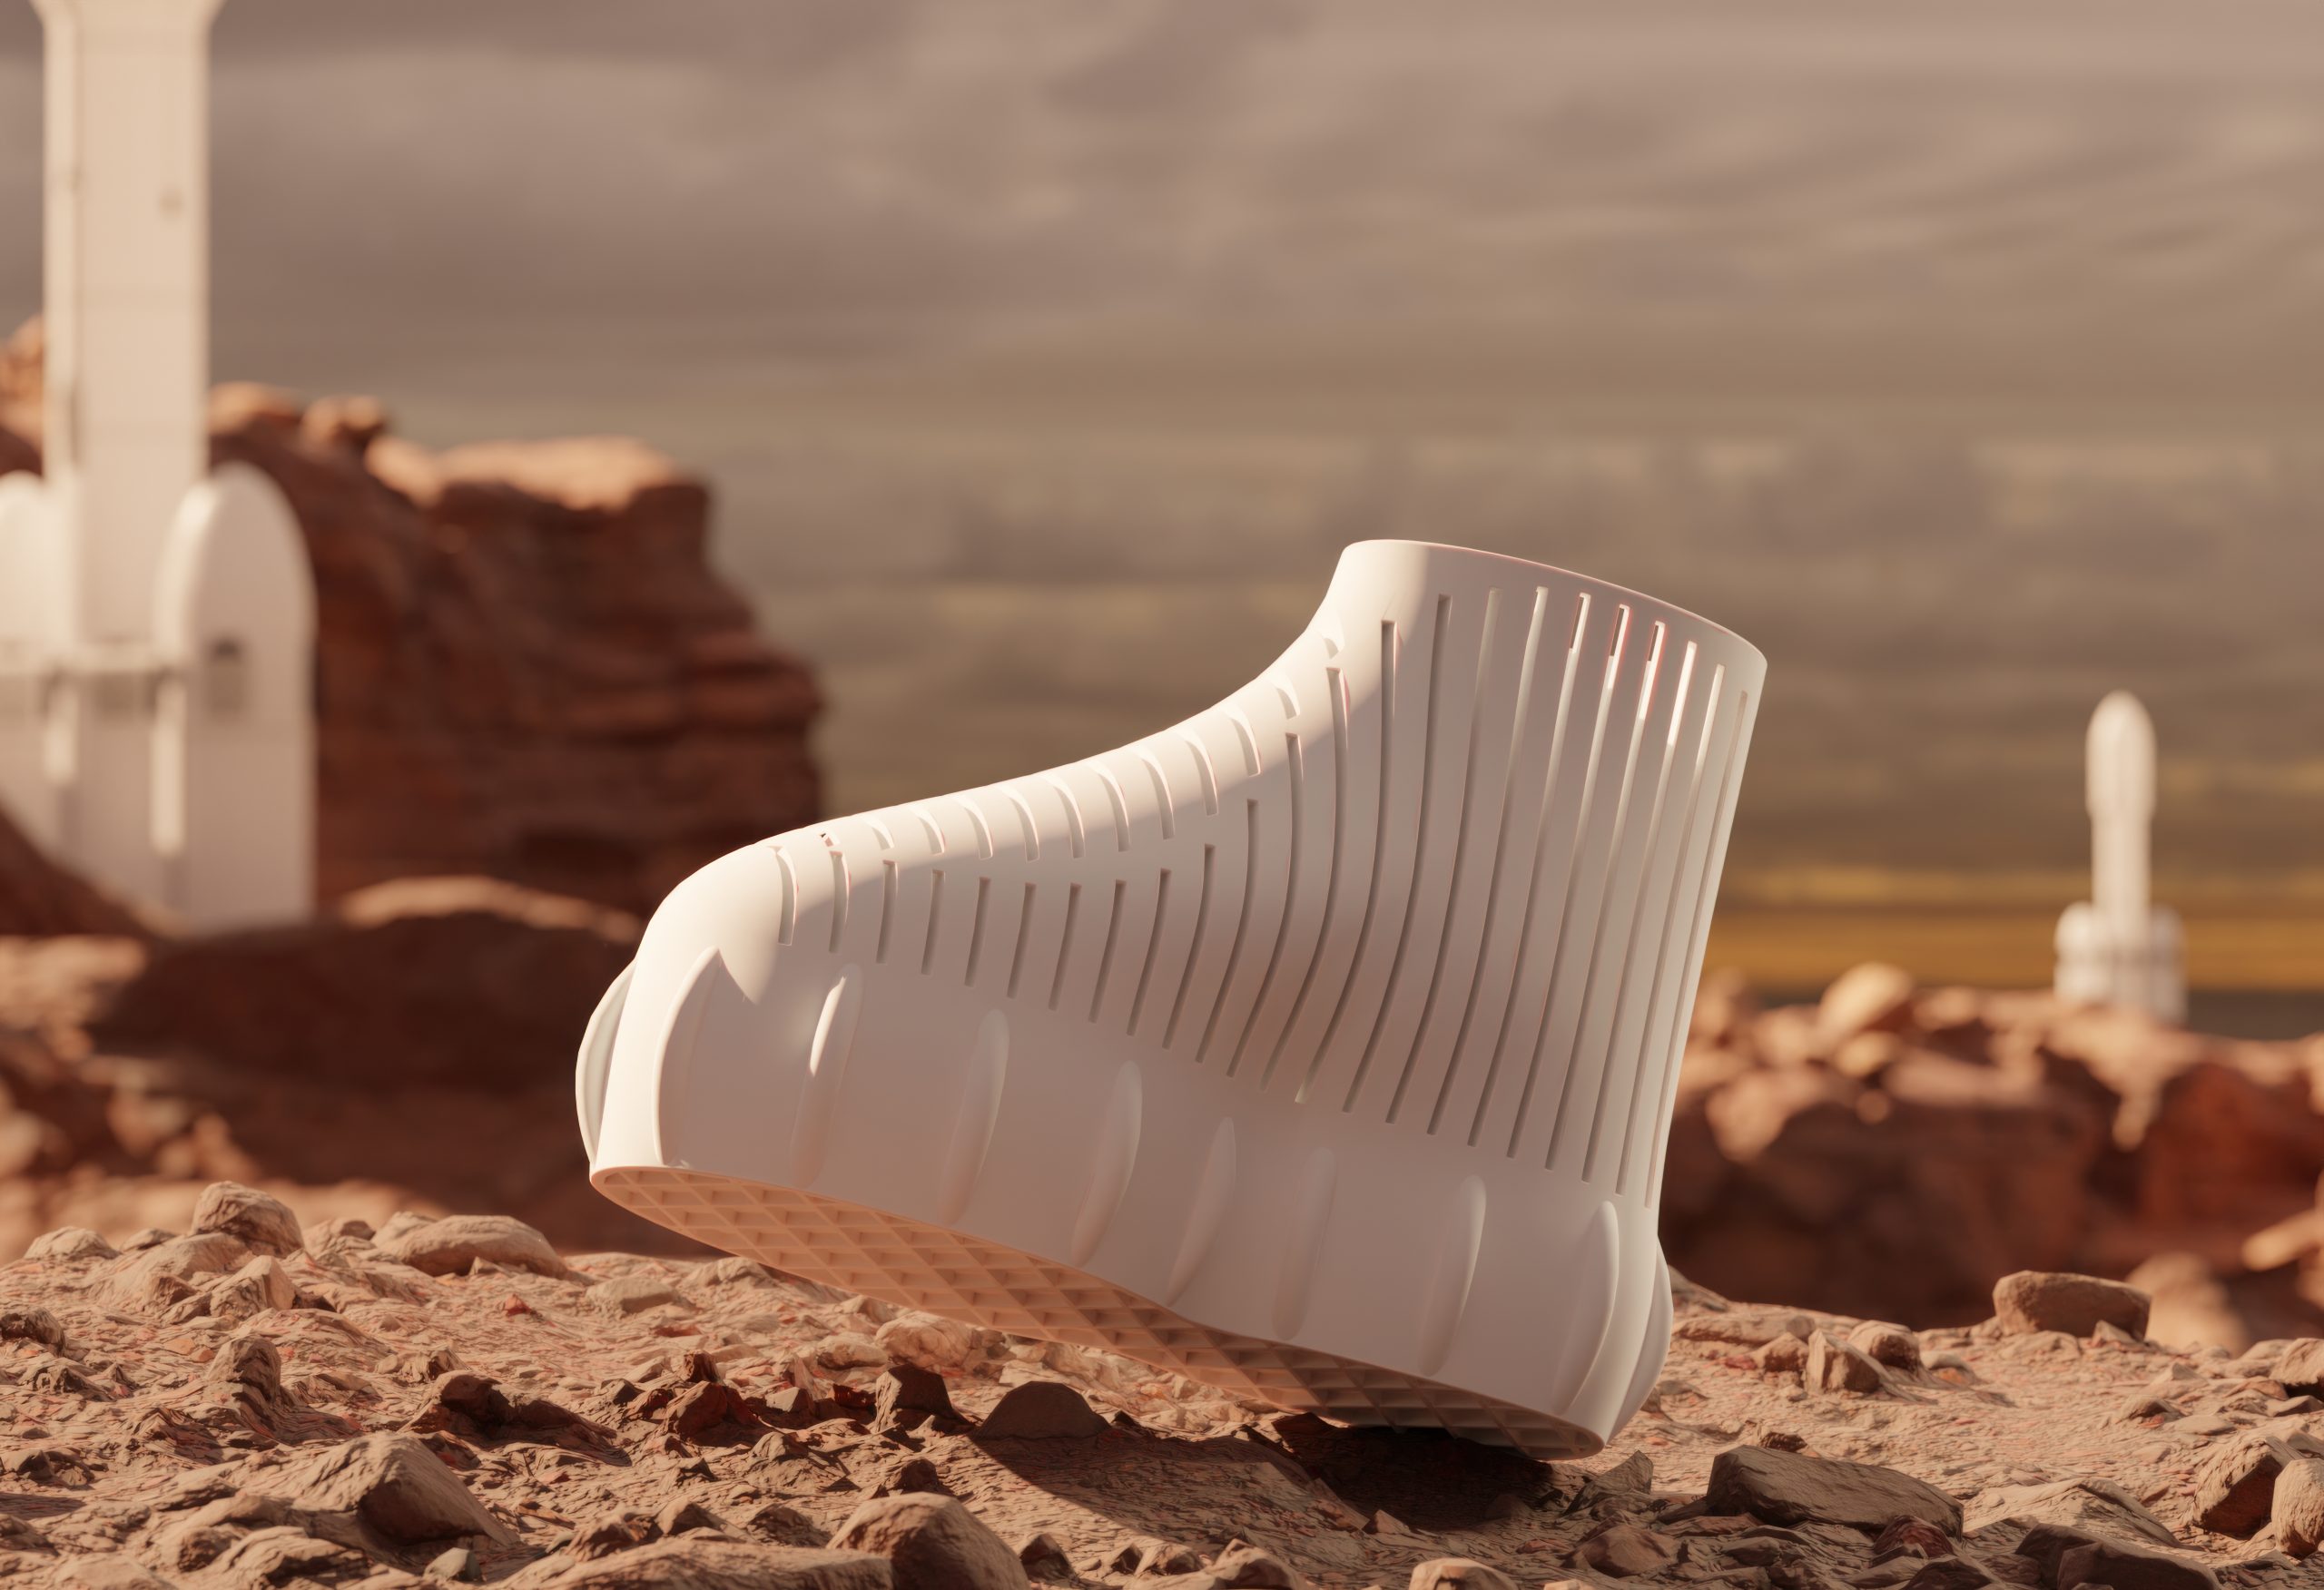 Rendering of a white, futuristic running shoe on red, rocky Mars soil. White spaceships can be seen in the background.